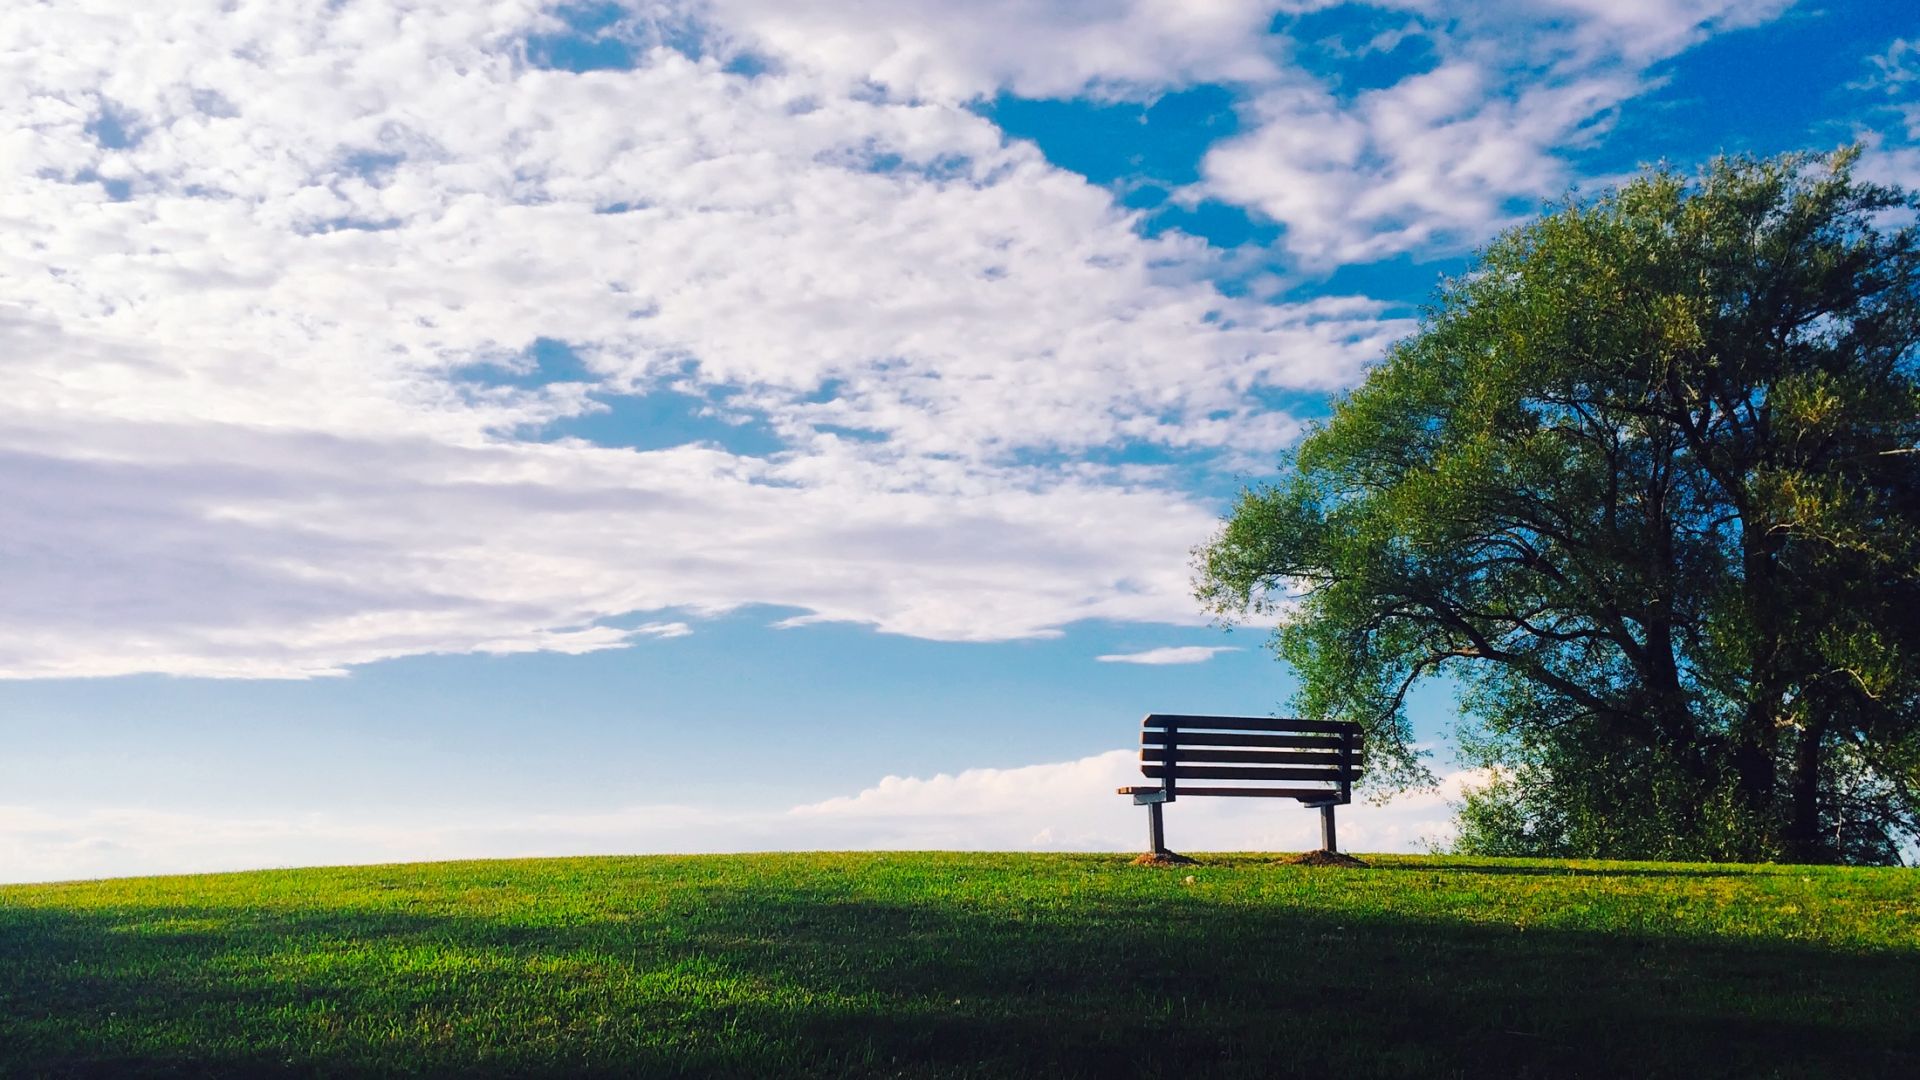 Desktop Wallpaper Bench, Sky, Clouds, Nature, Hd Image, Picture, Background,  Rvul3x